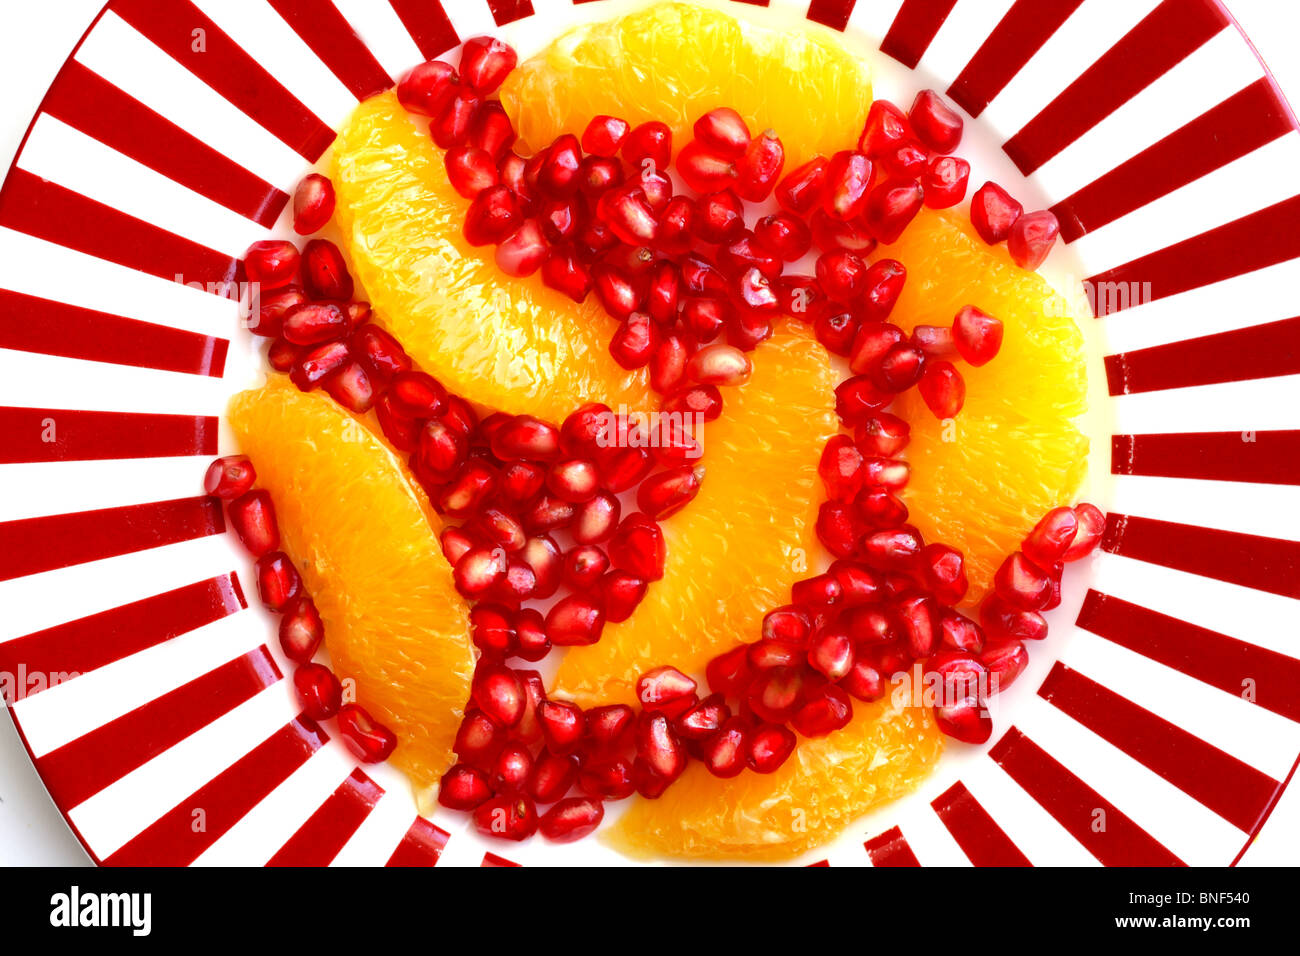 Freshly Prepared Healthy Fresh Pomegranate and Orange Salad After Dinner Dessert Served on A Plate With No People As A Flat Lay Close Up Stock Photo